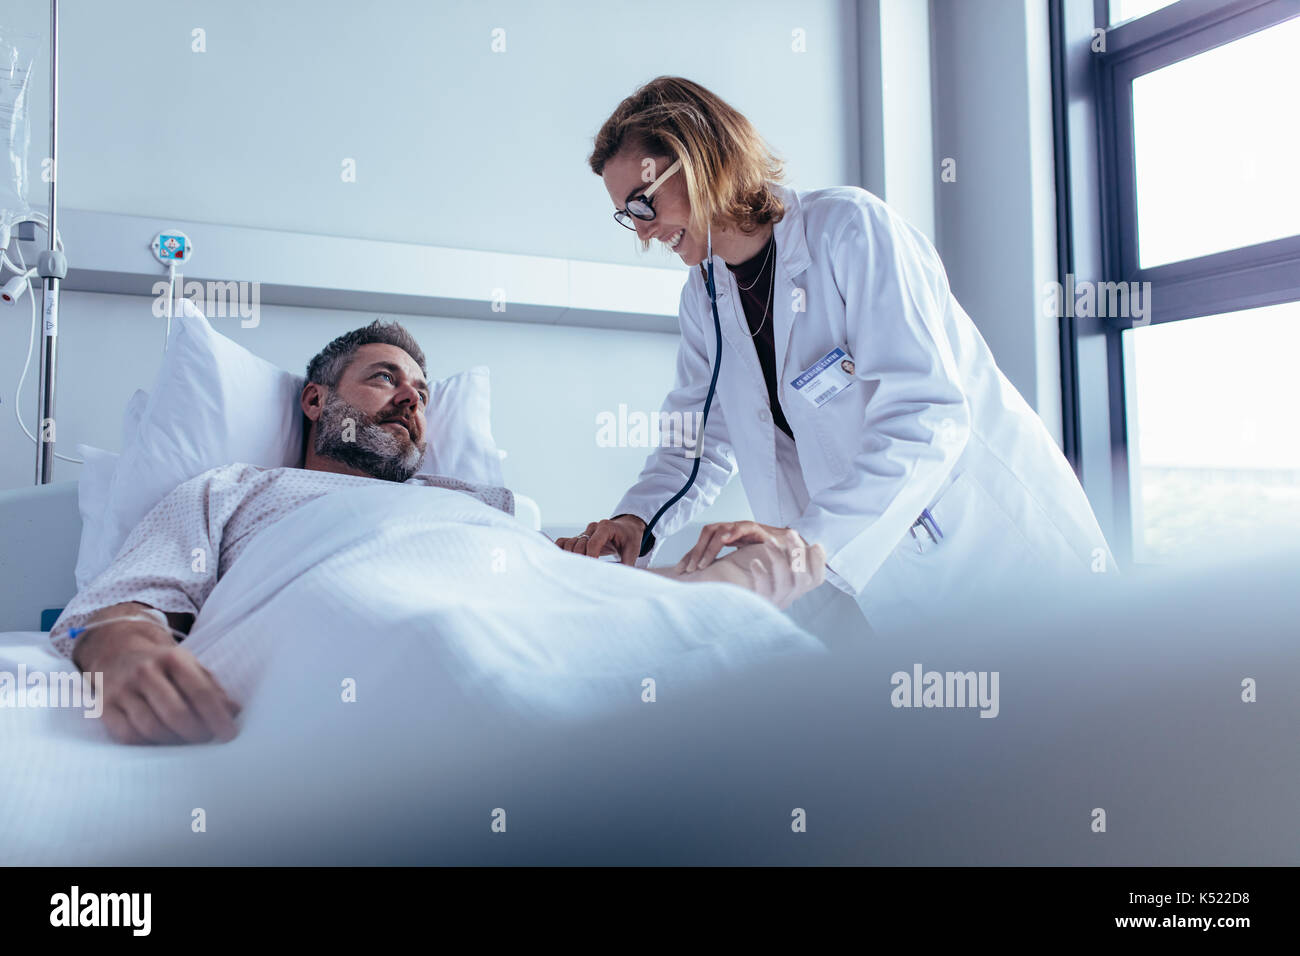 Hospitalized man lying in bed while doctor checking his pulse. Female physician examining male patient in hospital room. Stock Photo